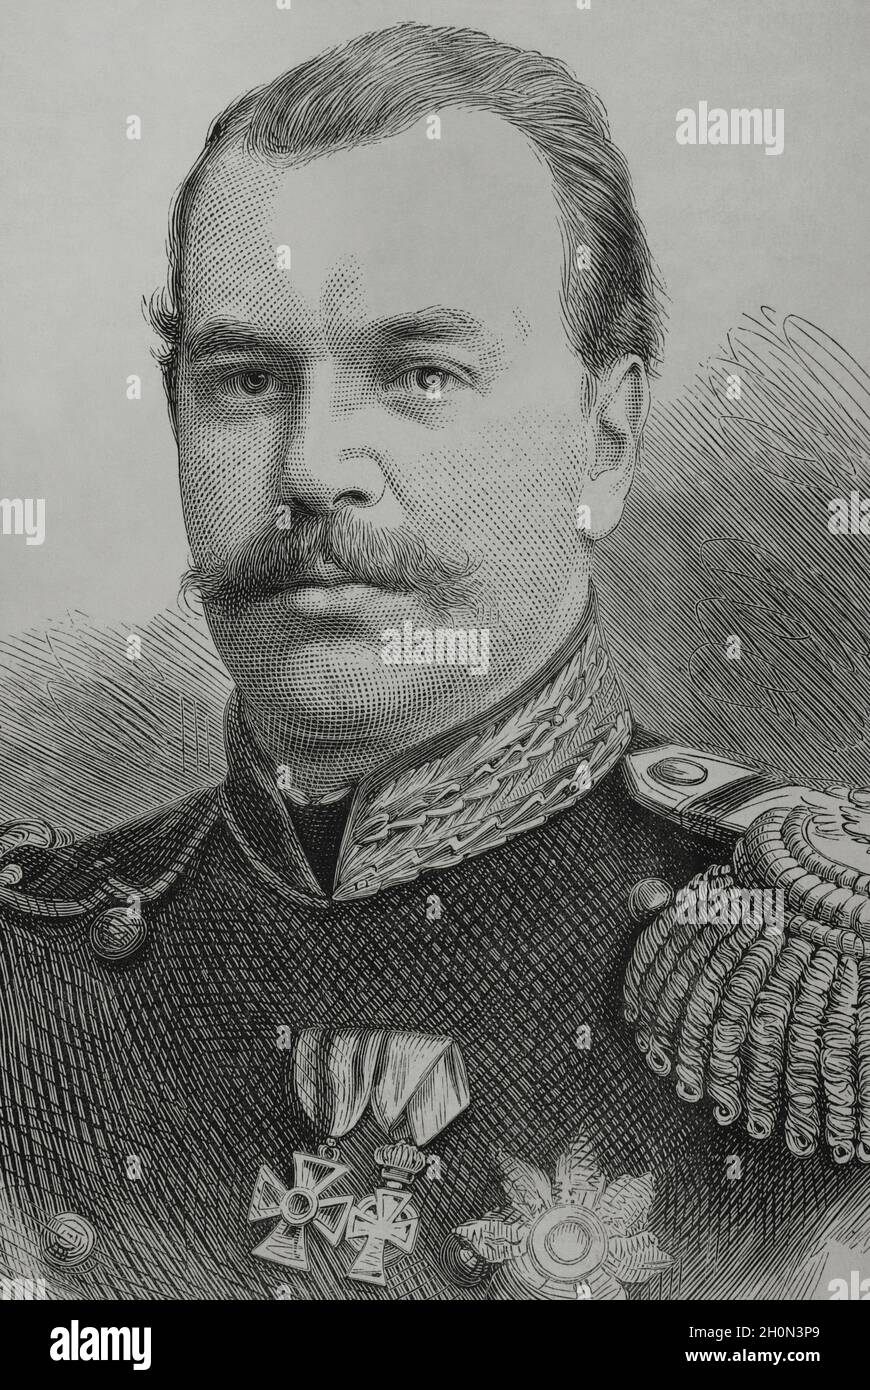 Alexander III of Russia (1845-1894). Czar of the Russian Empire, King of Poland and Grand Duke of Finland from 1881 to 1894. Portrait. Engraving. La I Stock Photo